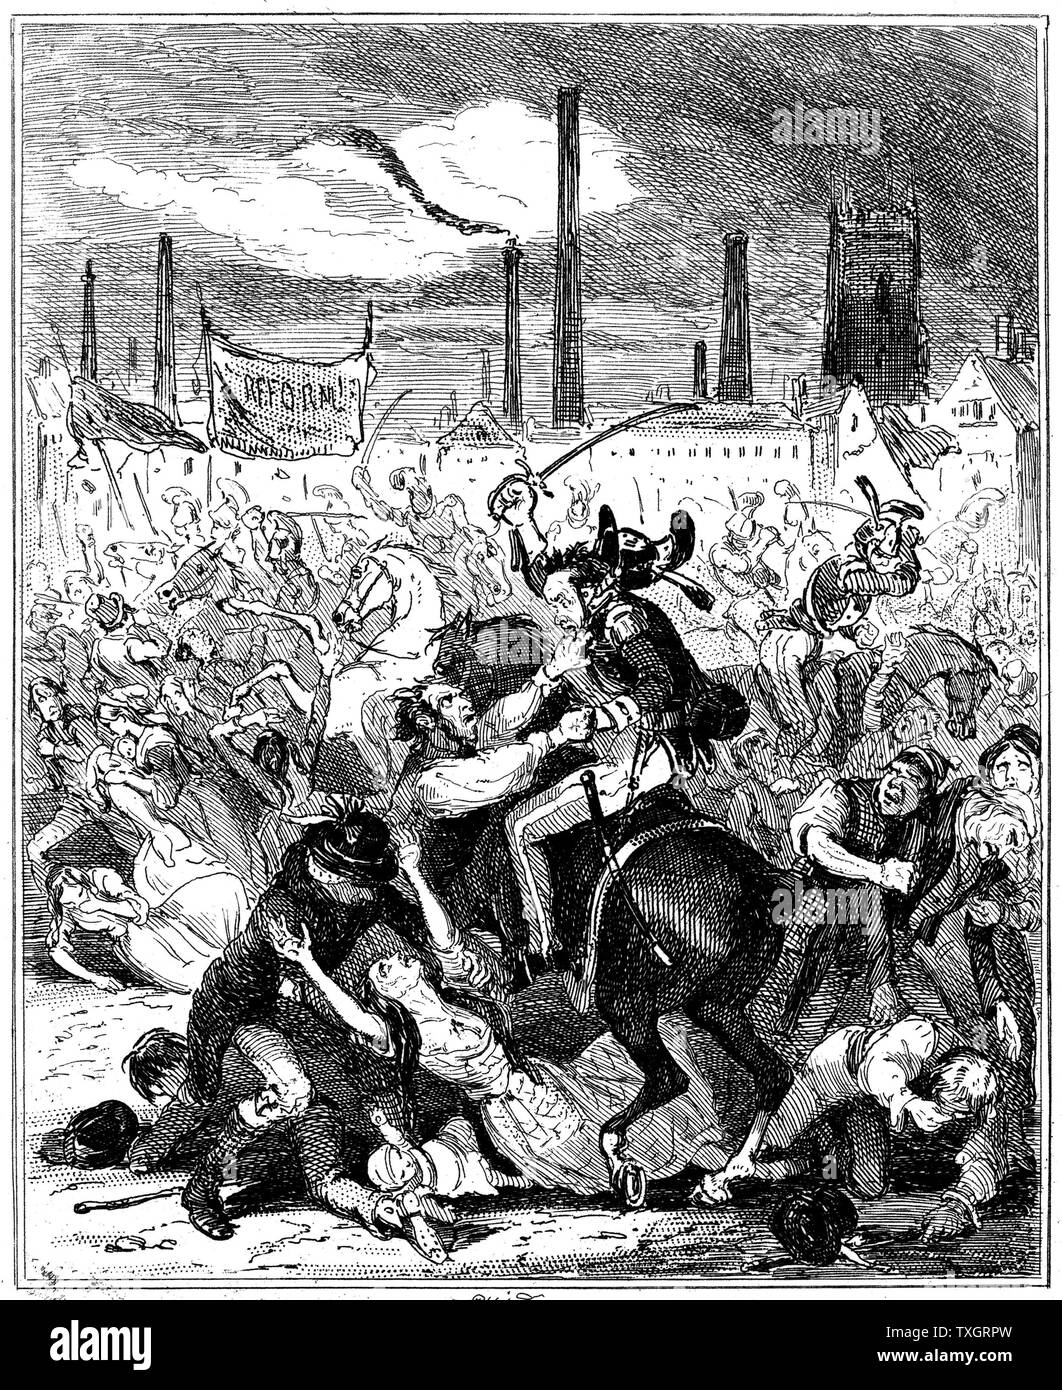 Peterloo Massacre, Manchester, England, 16 August 1819.  15th Hussars charging unarmed crowd gathered near St Peter's Church to hear speeches supporting Reform of Parliament and repeal of Corn Laws. 6 killed, about 70 wounded treated in local infirmaries. Illustration by Phiz (Hablot Knight Browne) for Camden Pelham 'The Chronicles of Crime',  1887  London Stock Photo